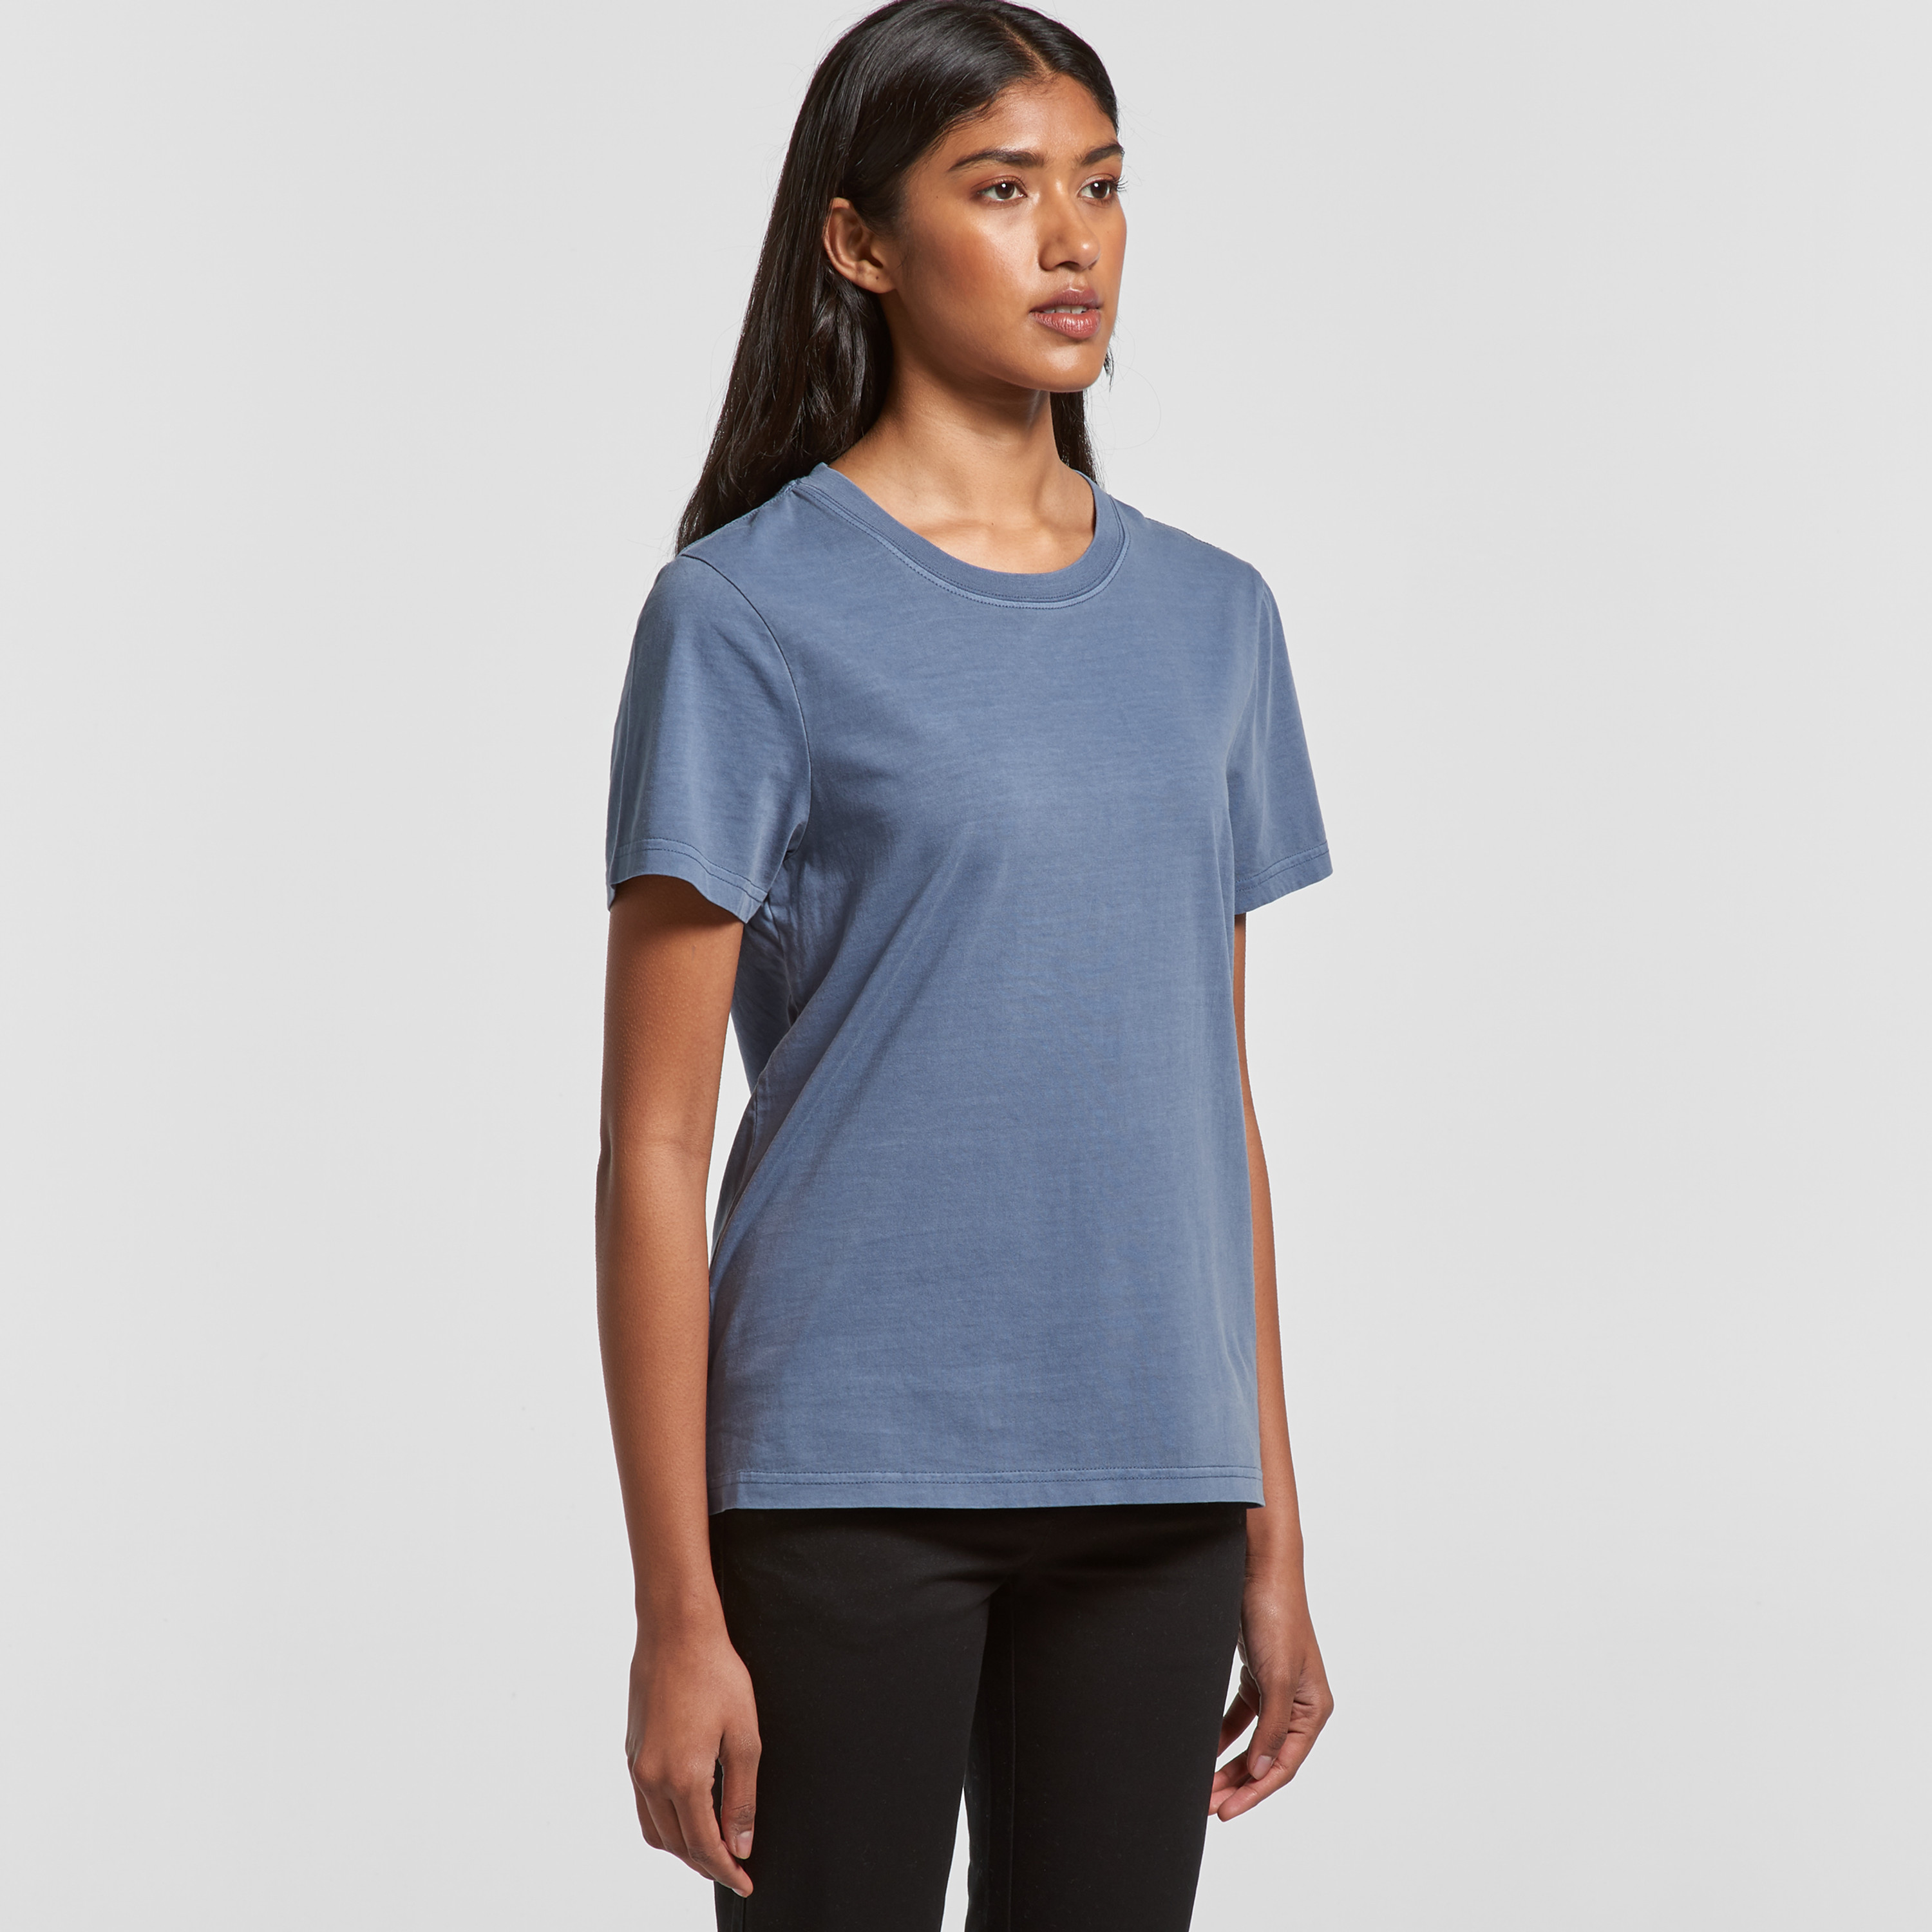 Wo's Maple Faded Tee | 4065 - AS Colour NZ